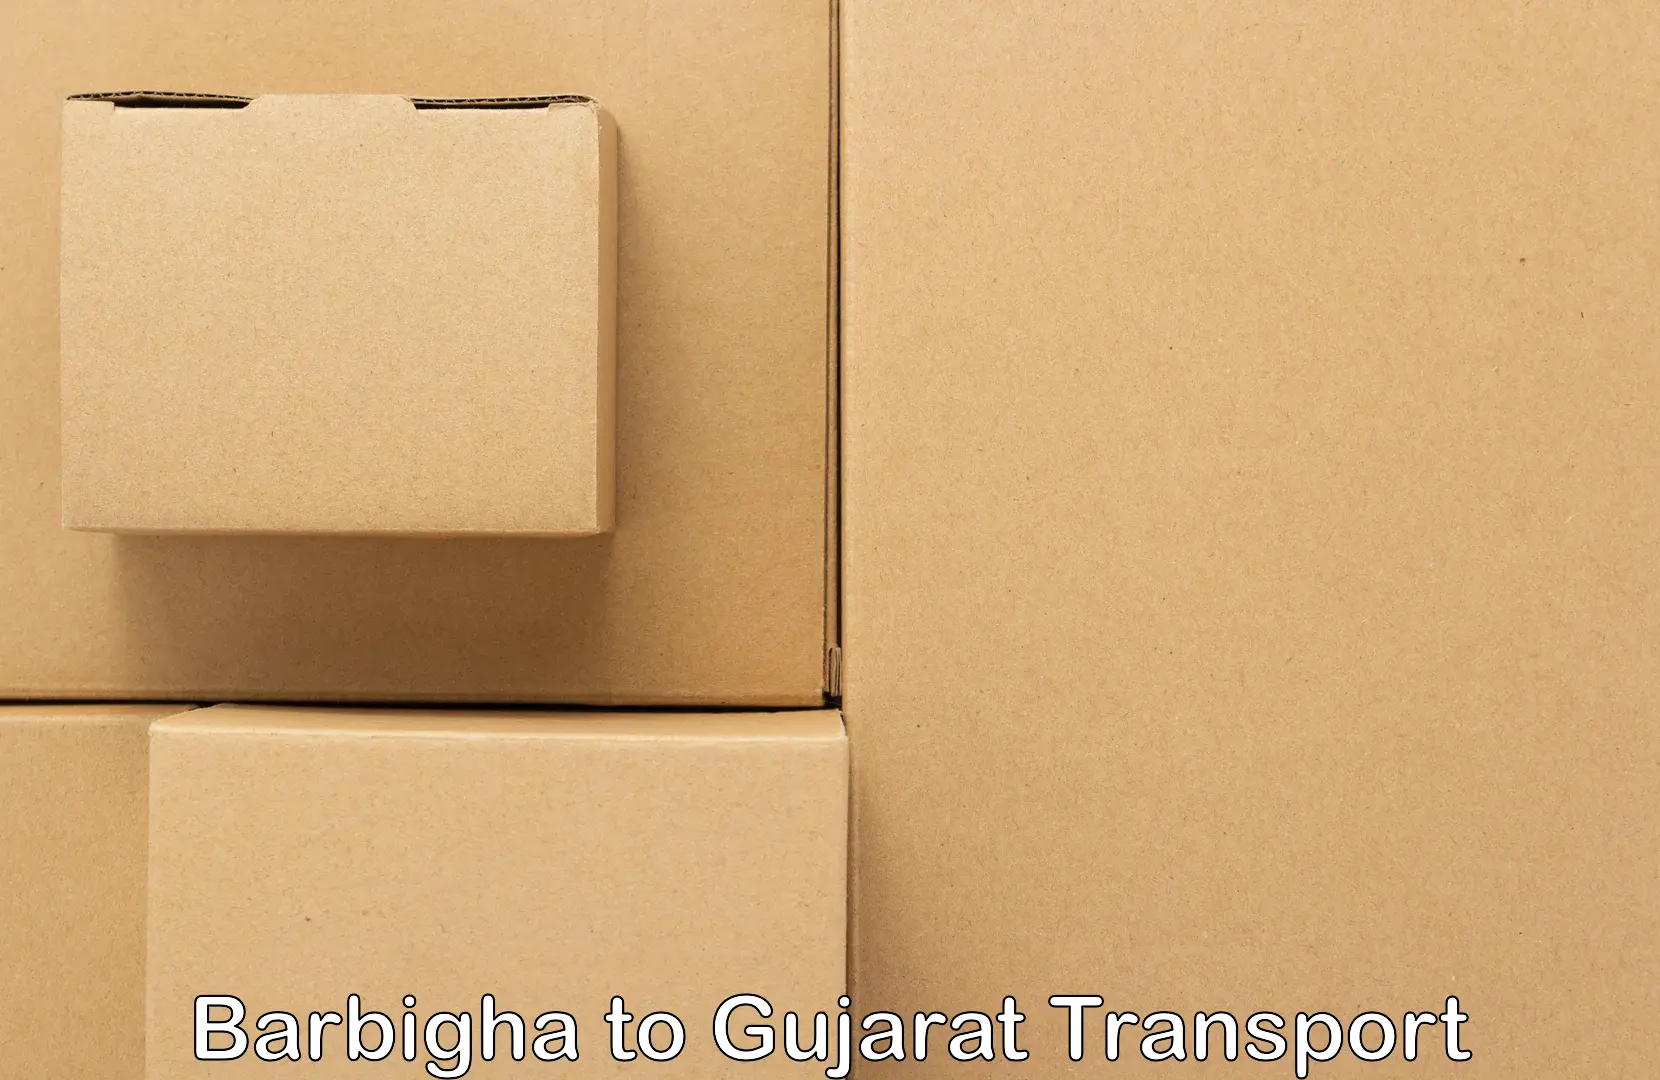 Daily parcel service transport Barbigha to Dholka